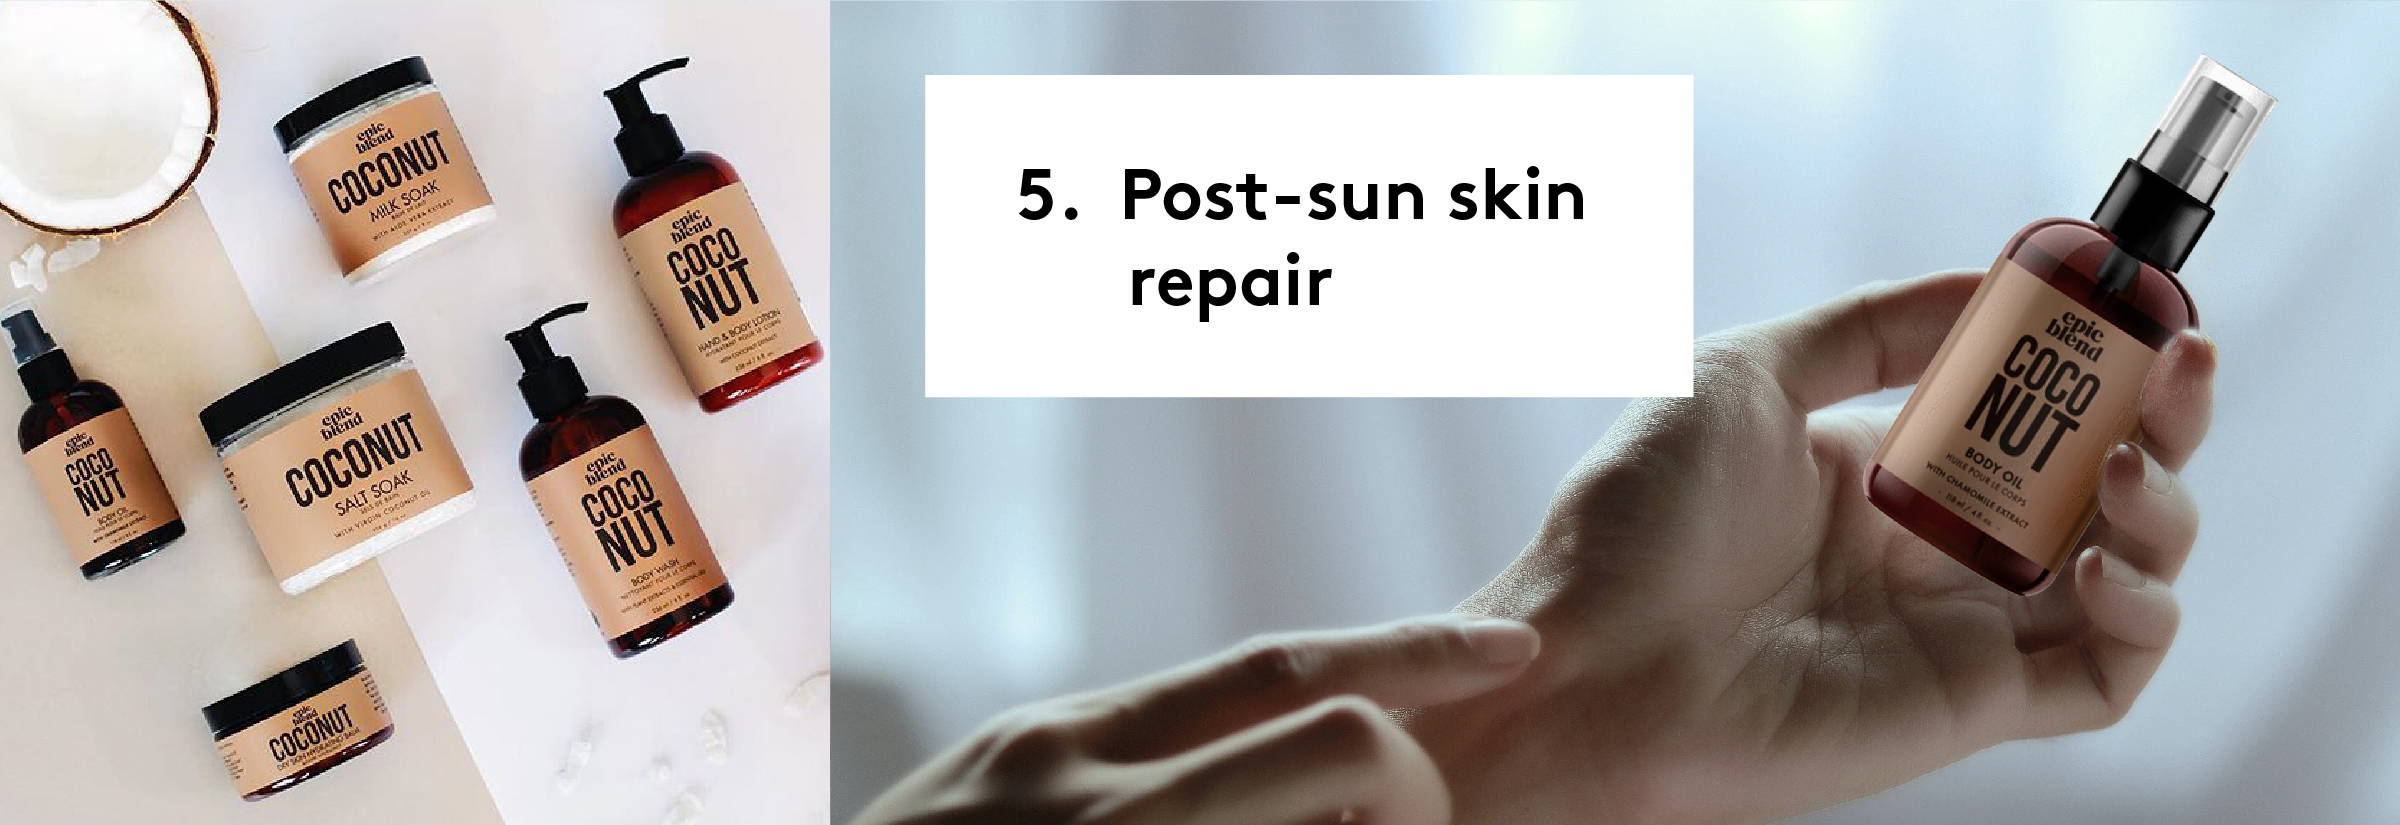 Get the POST-SUN SKIN REPAIR from EPIC BLEND!